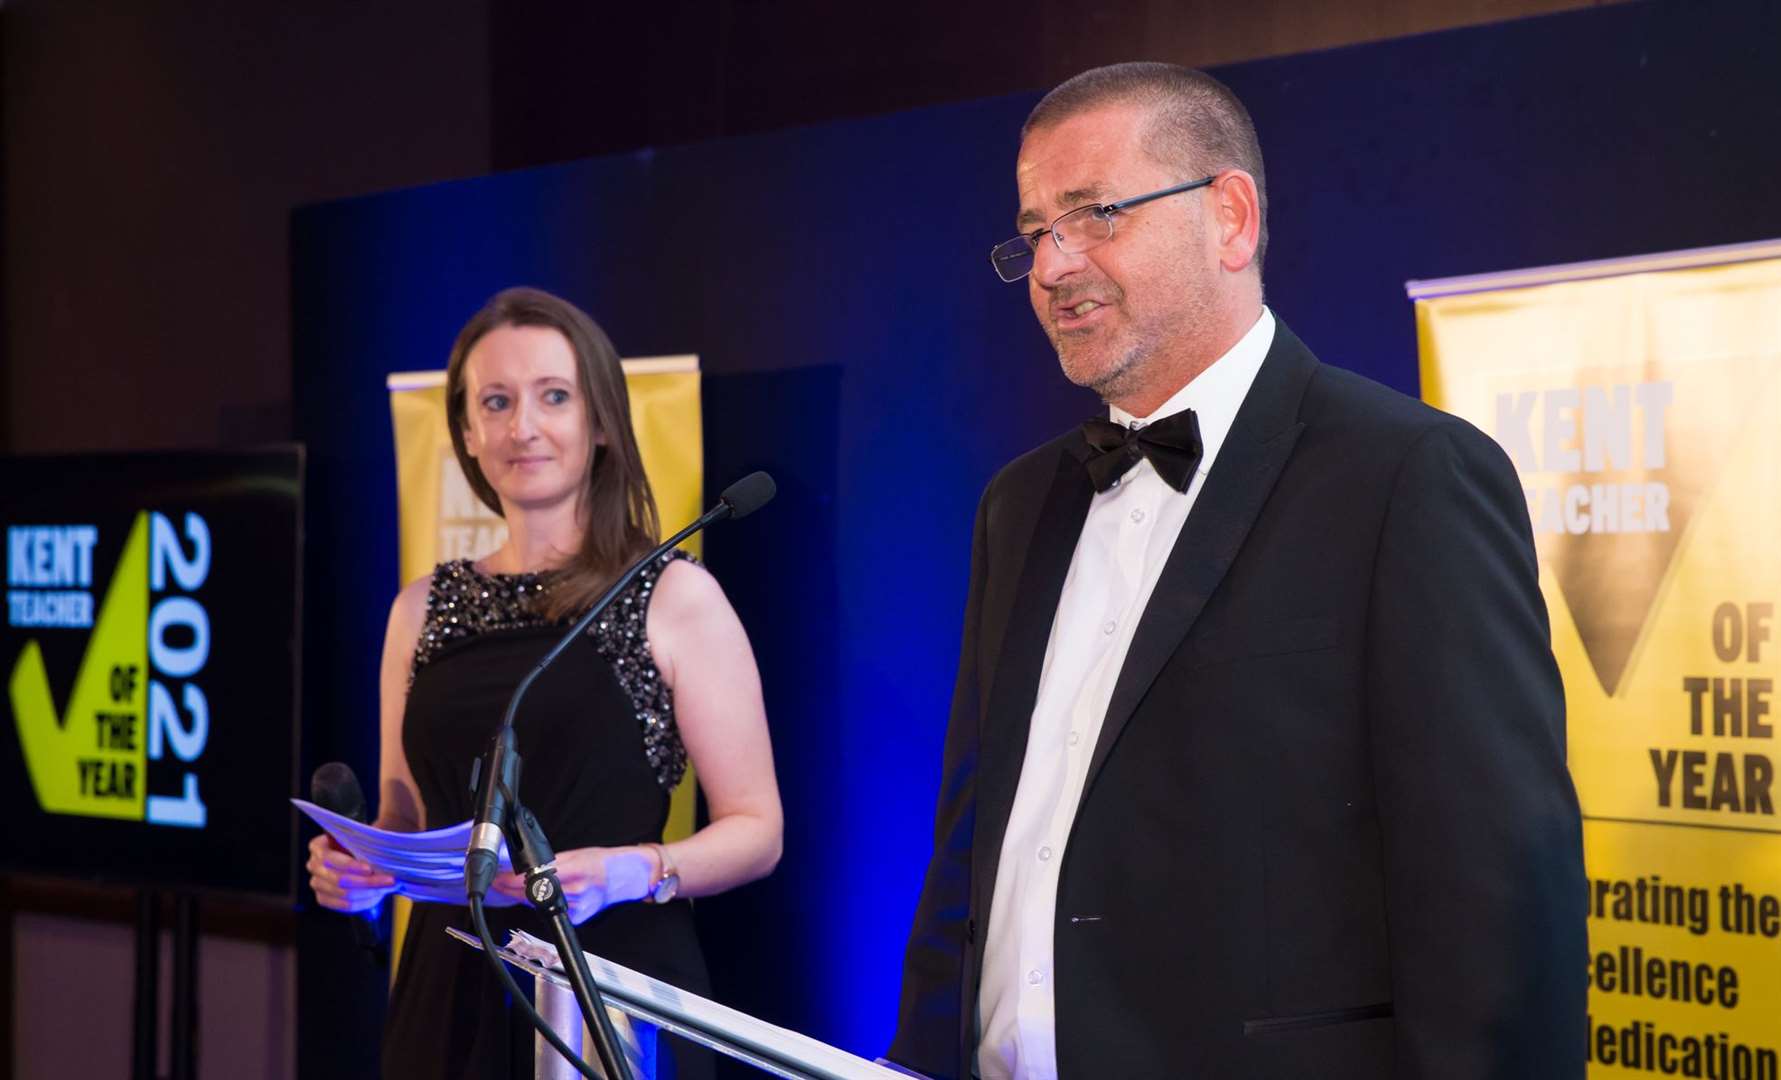 KM Charity Team chief executive Mike Ward, who hosted the evening with kmfm's Nicola Everett Picture: Countrywide Photographic